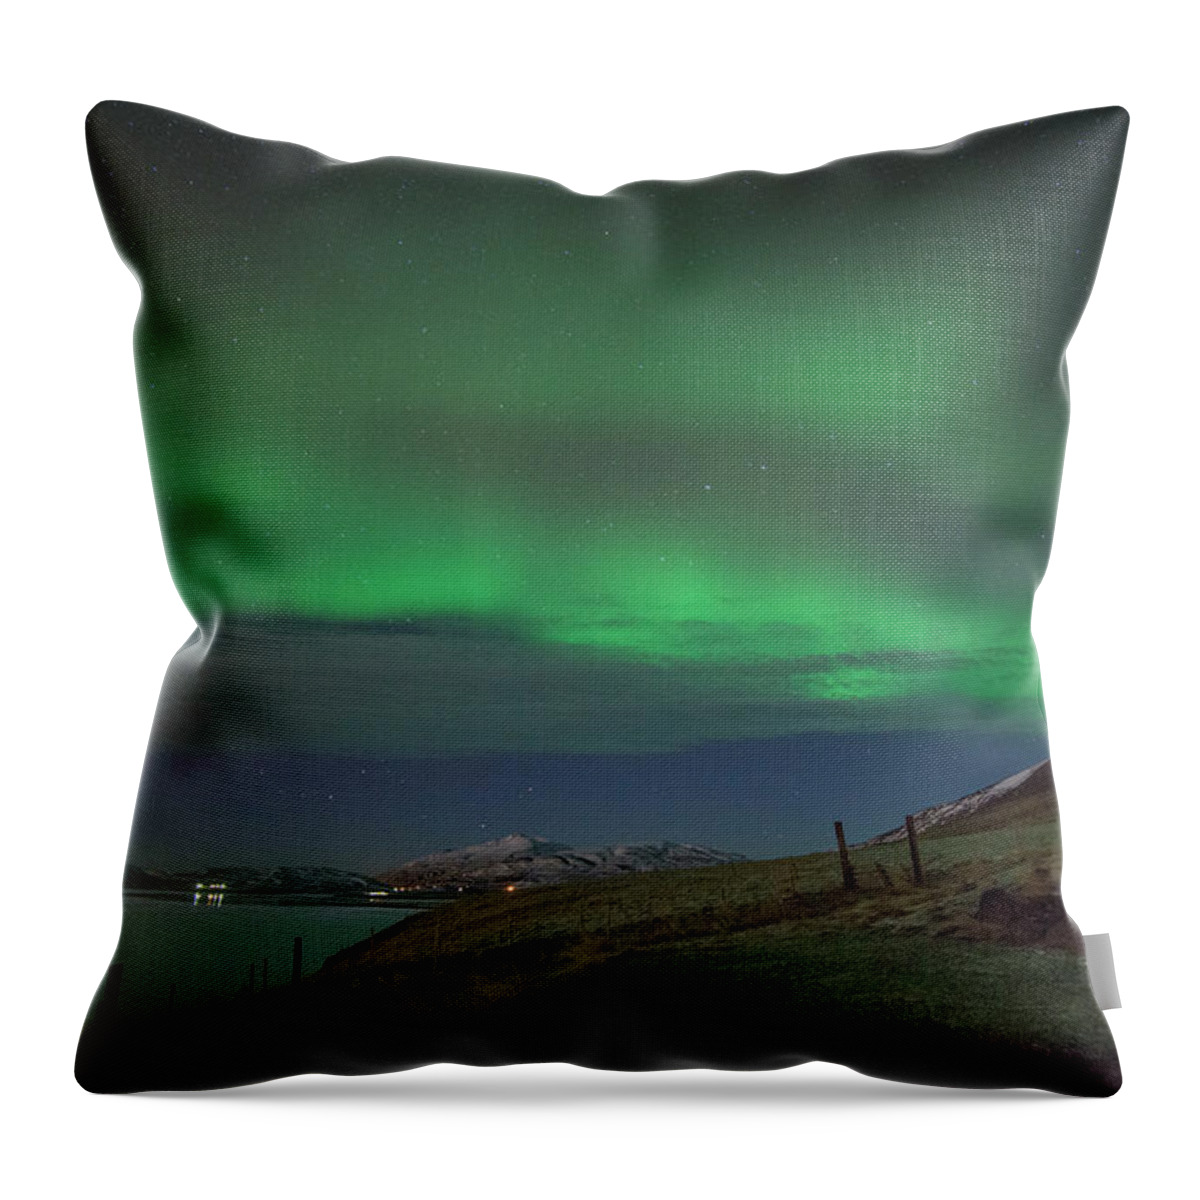 Space Throw Pillow featuring the photograph The Aurora Borealis Over Iceland by Matt Swinden